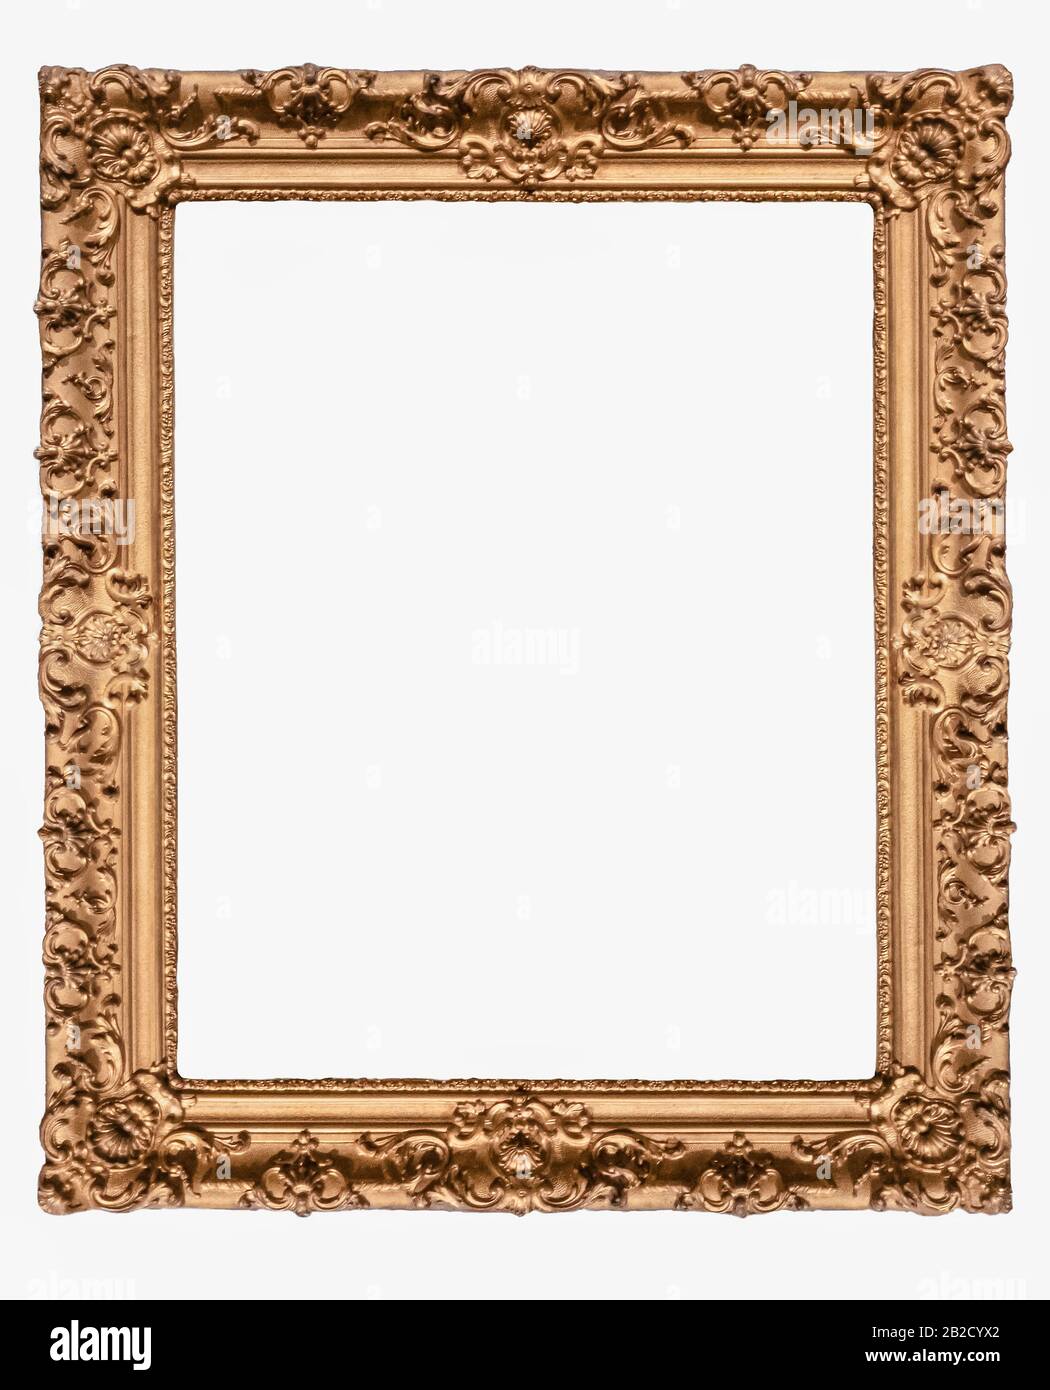 Classical frame wooden golden border on white background isolated vintage artistic gallery empty Stock Photo